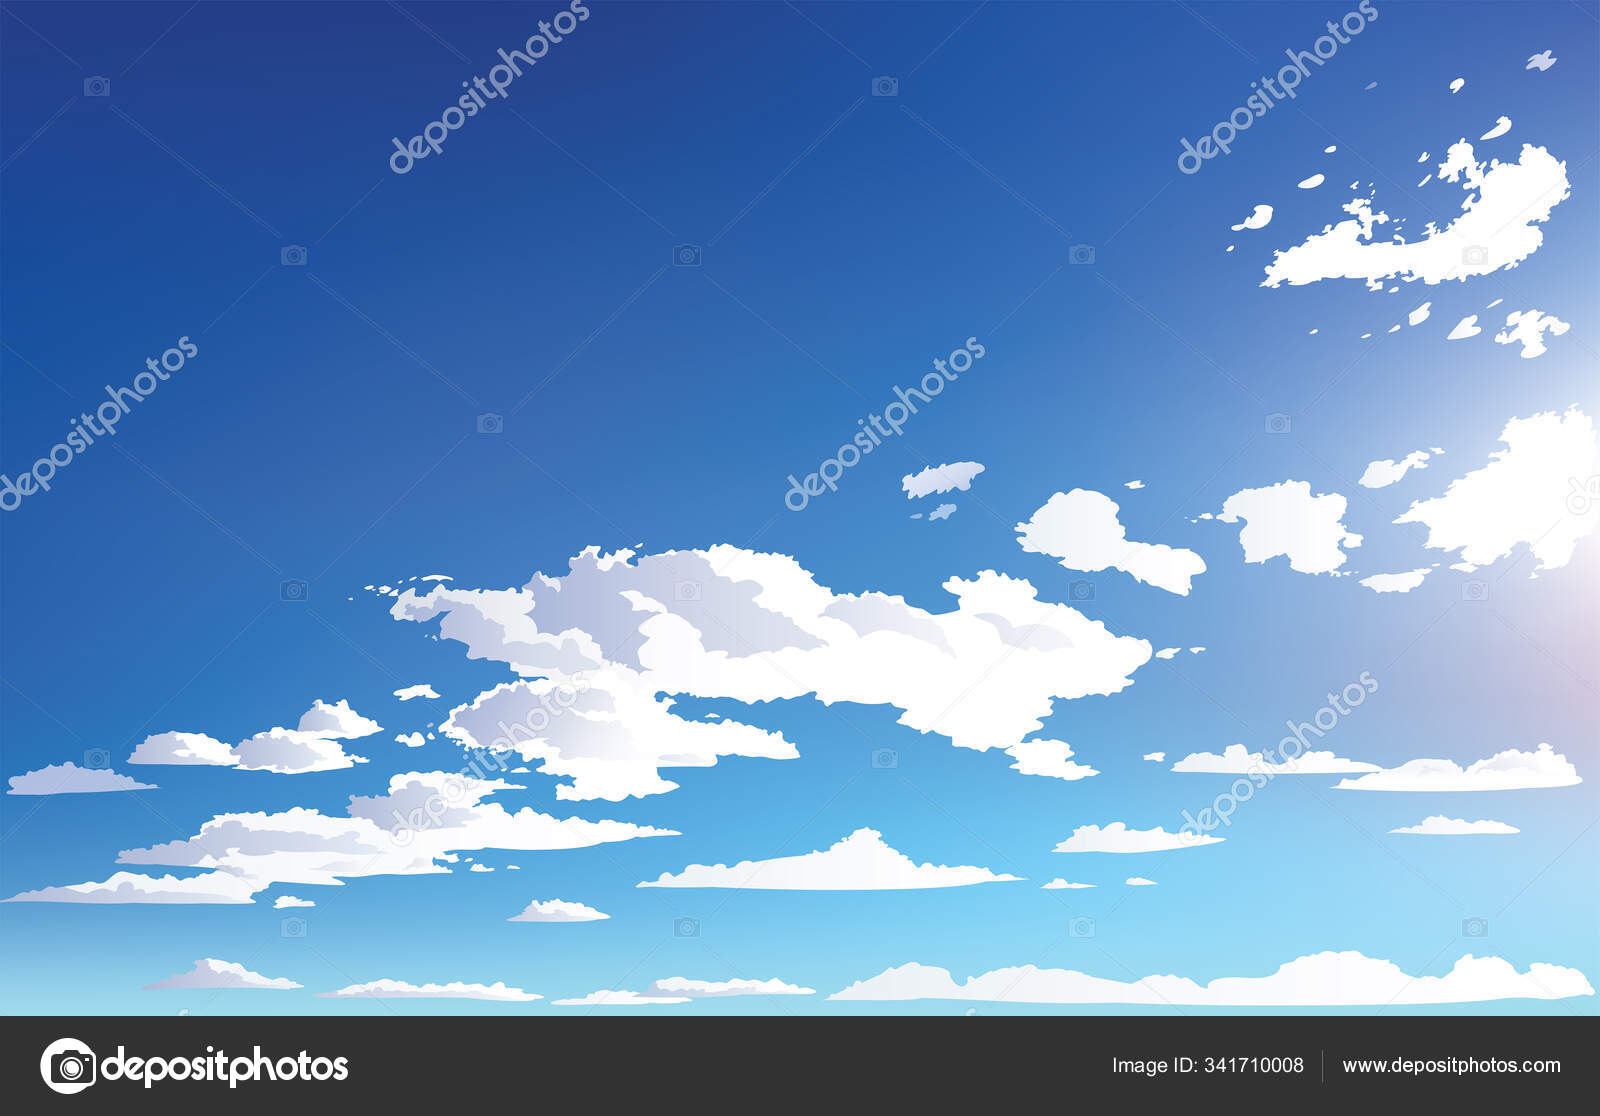 Vector Landscape Sky Clouds Anime Scenery Background Design Stock Vector by  © 341710008